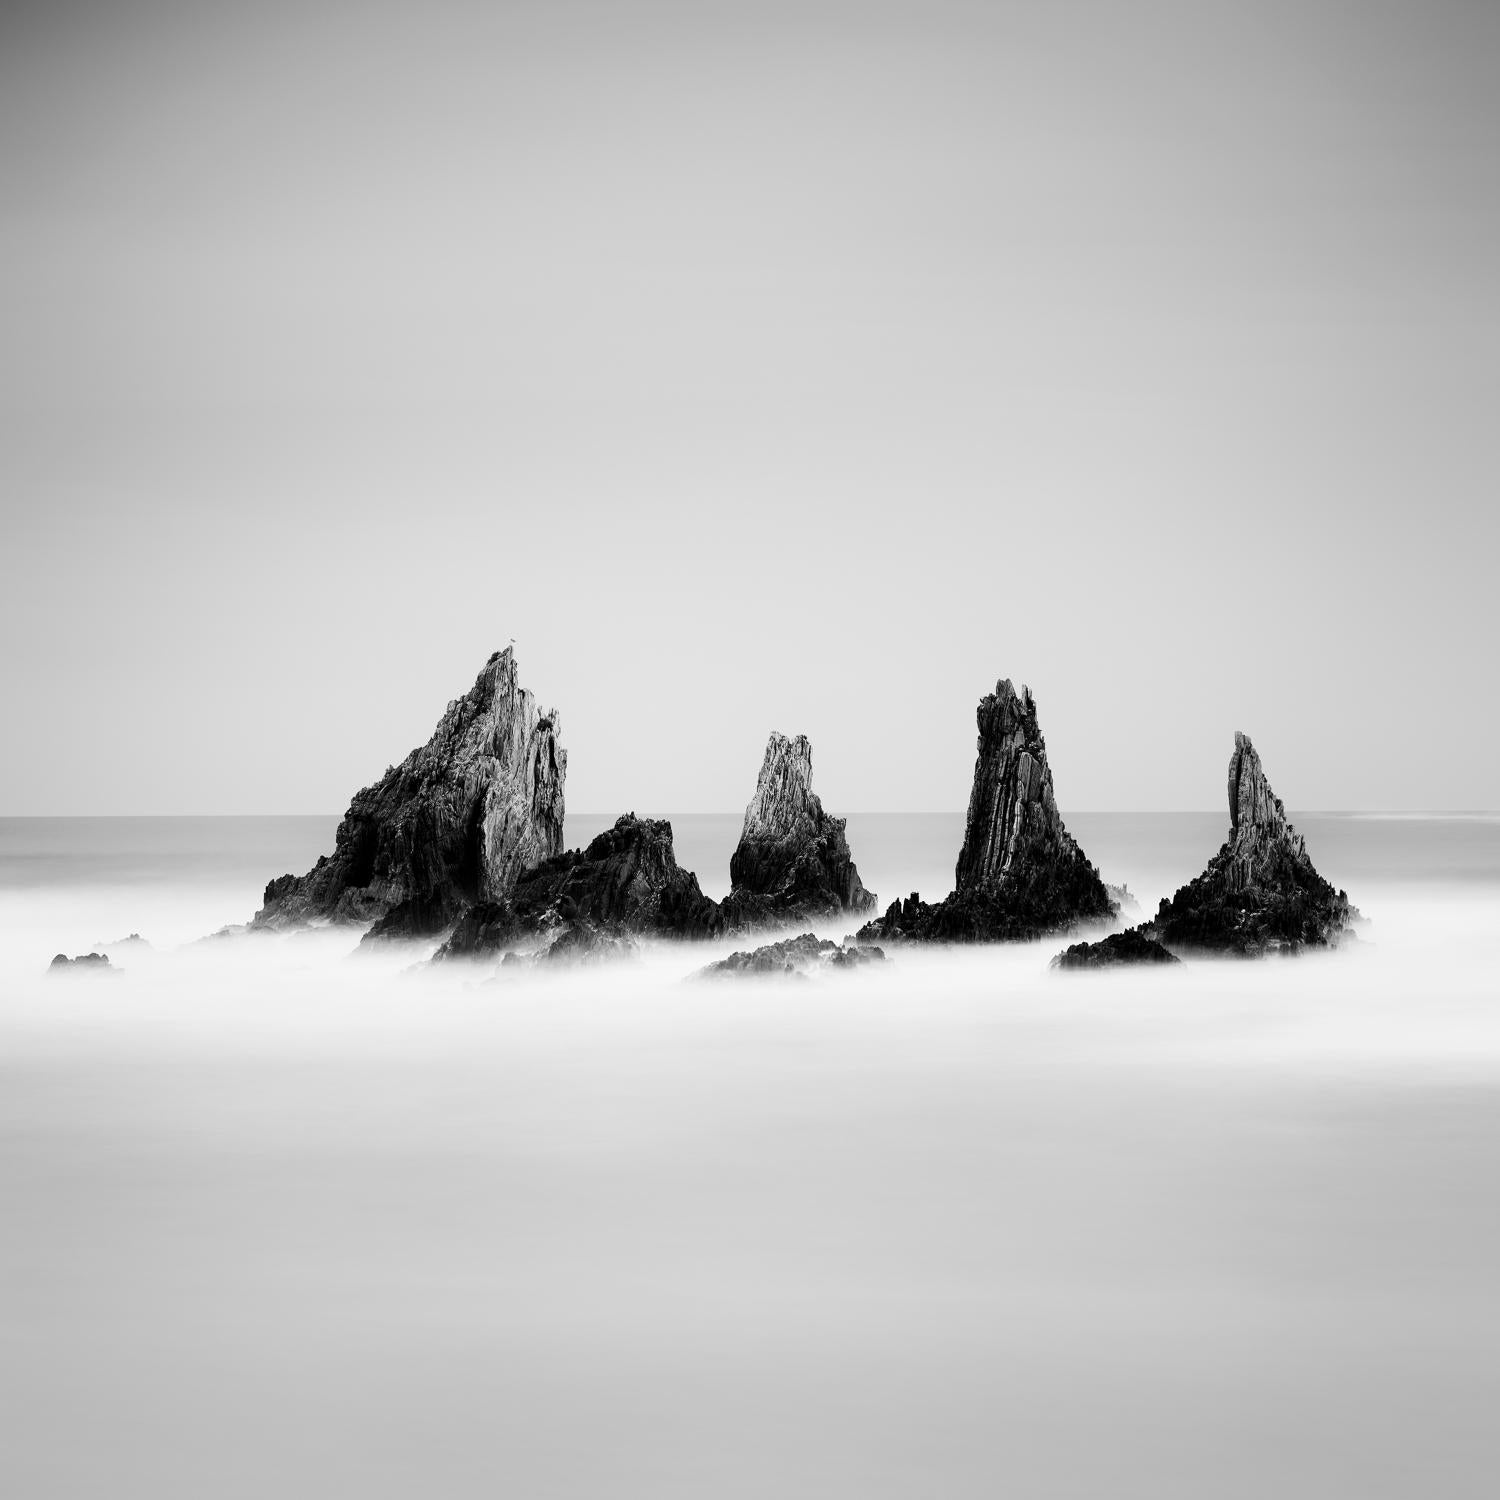  Rocky Peaks, black and white art photography, waterscape, landscape, framed - Photograph by Gerald Berghammer